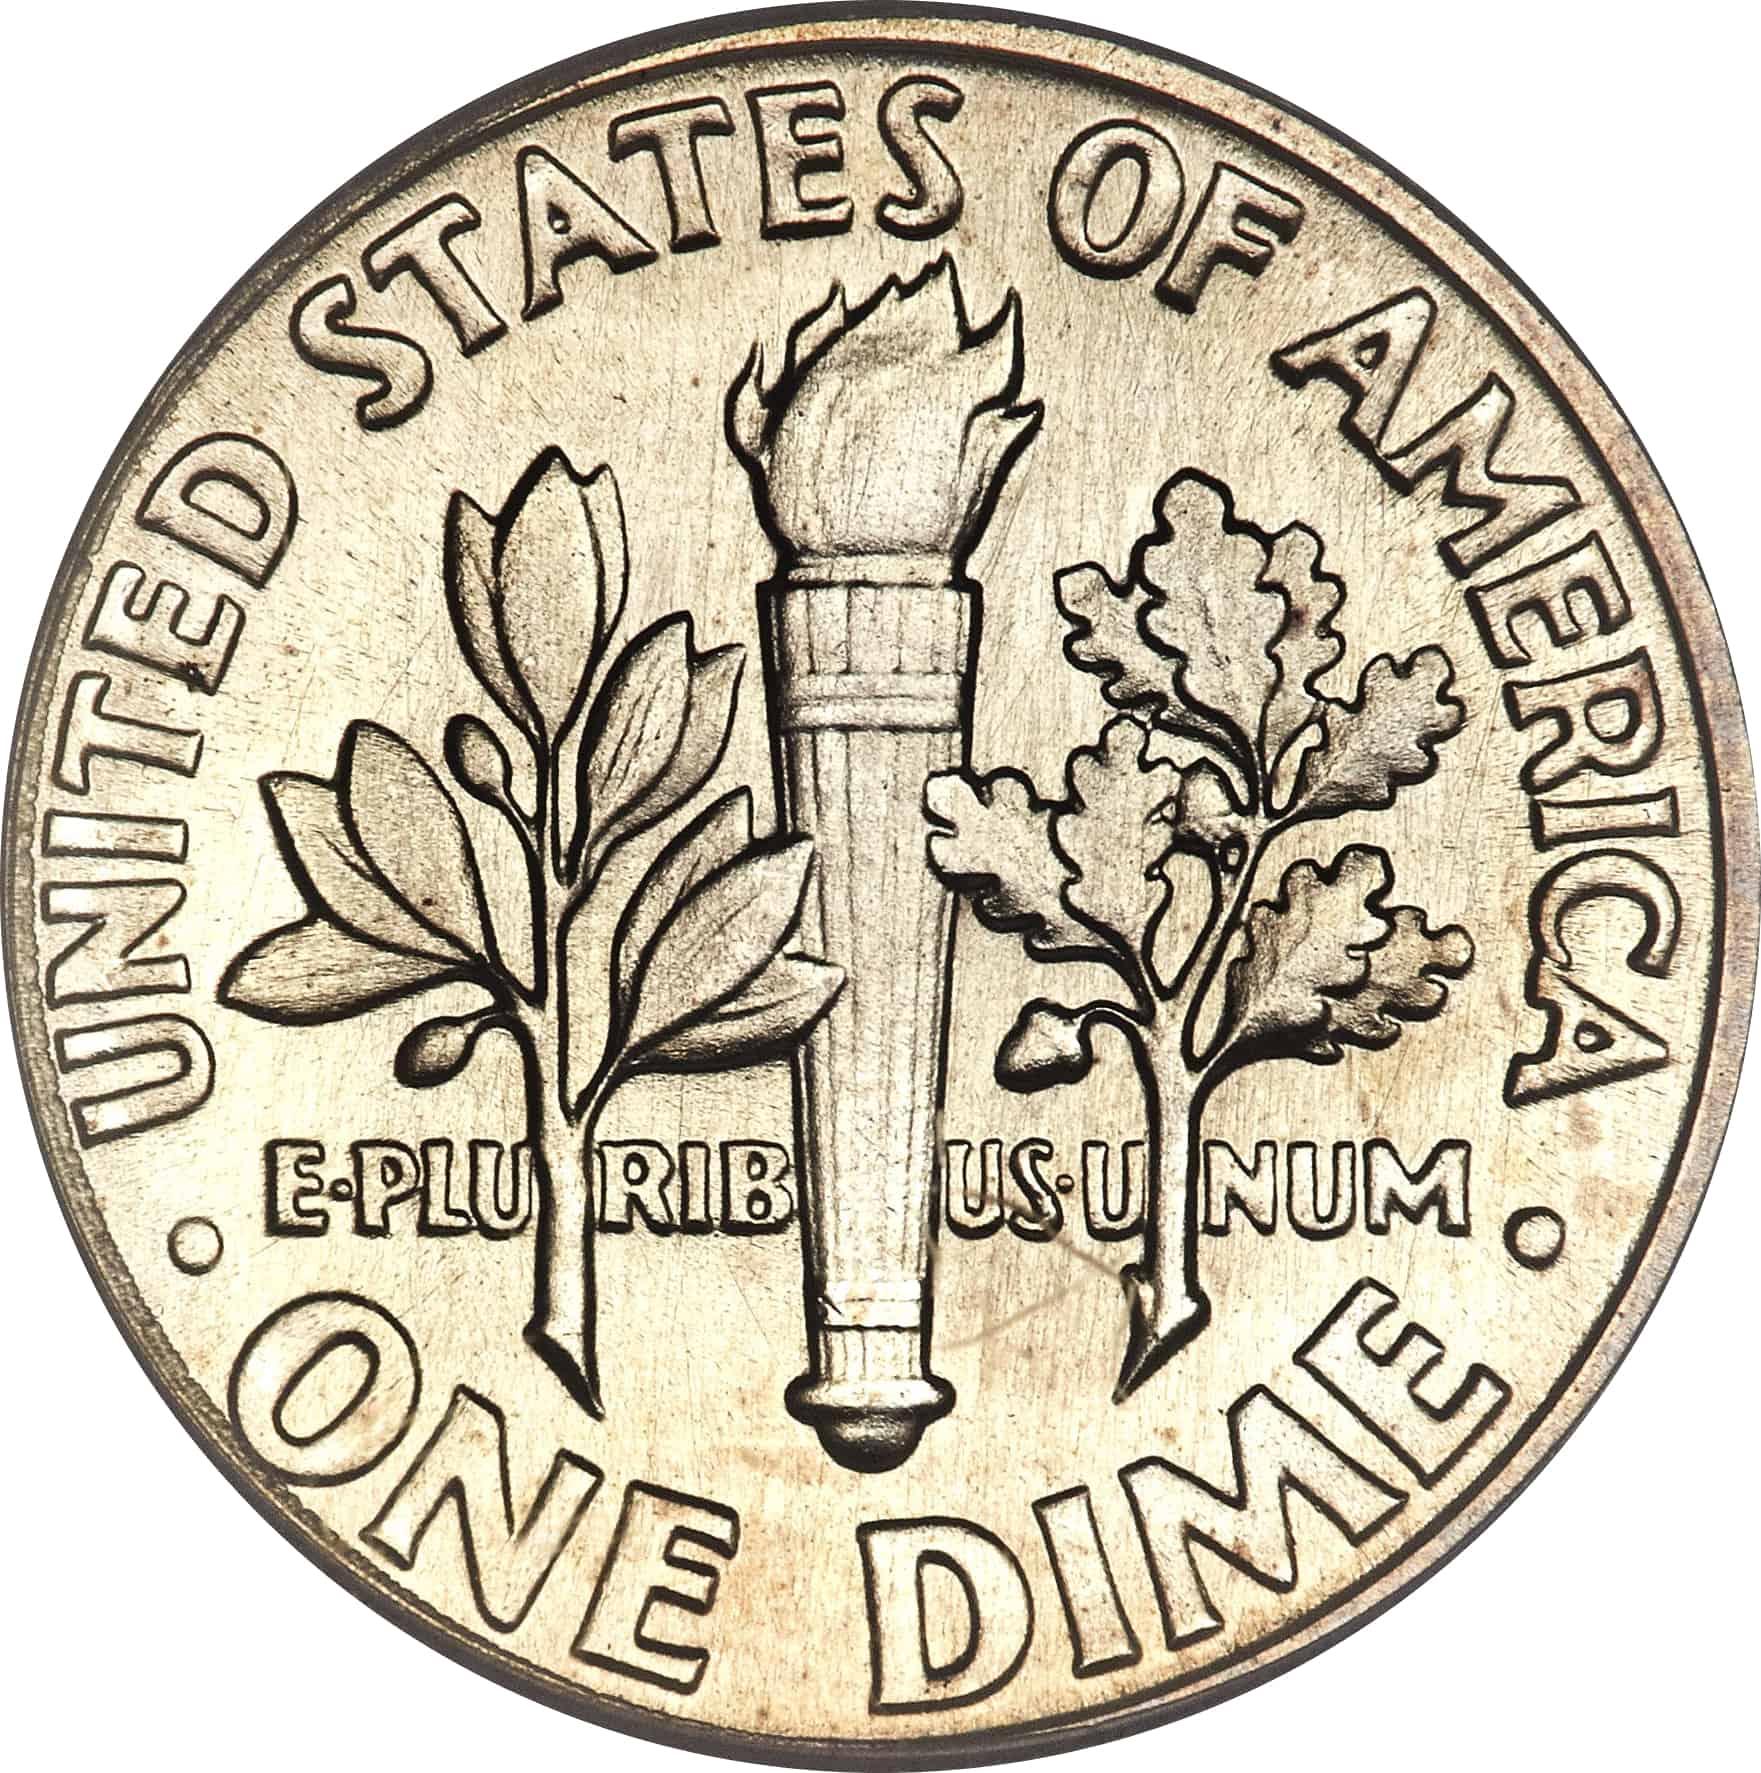 The Reverse of the 1964 Dime